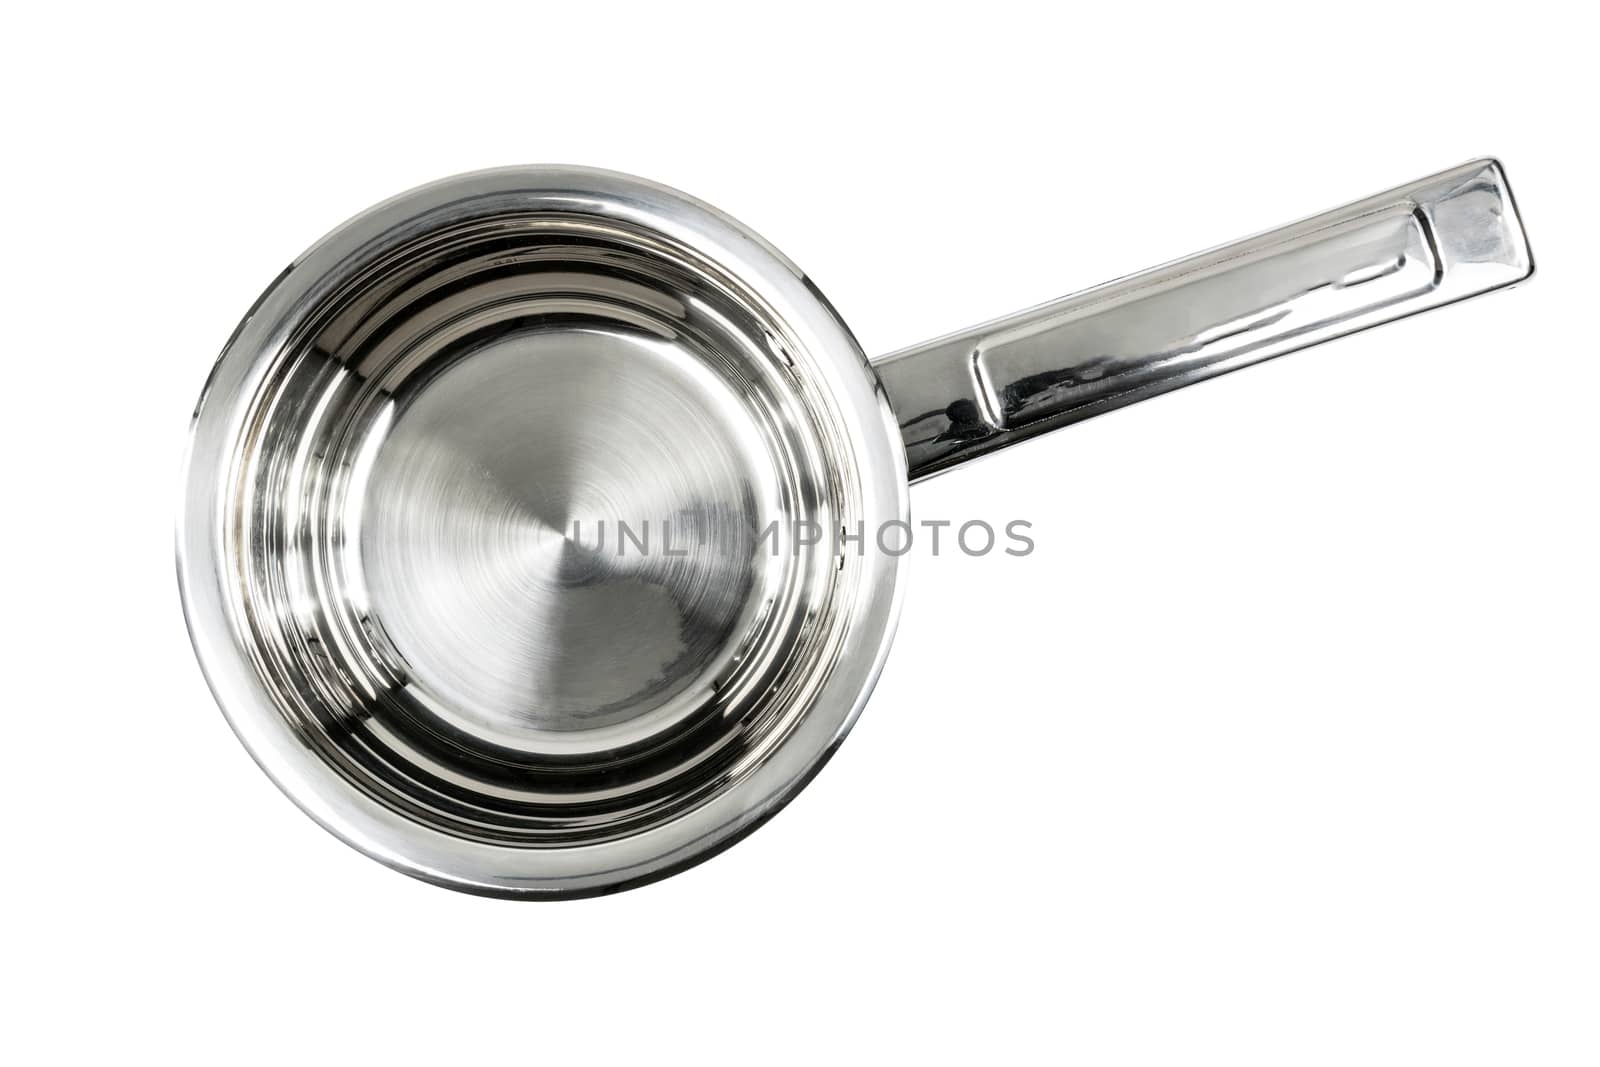 Stainless steel cooking pan by wdnet_studio